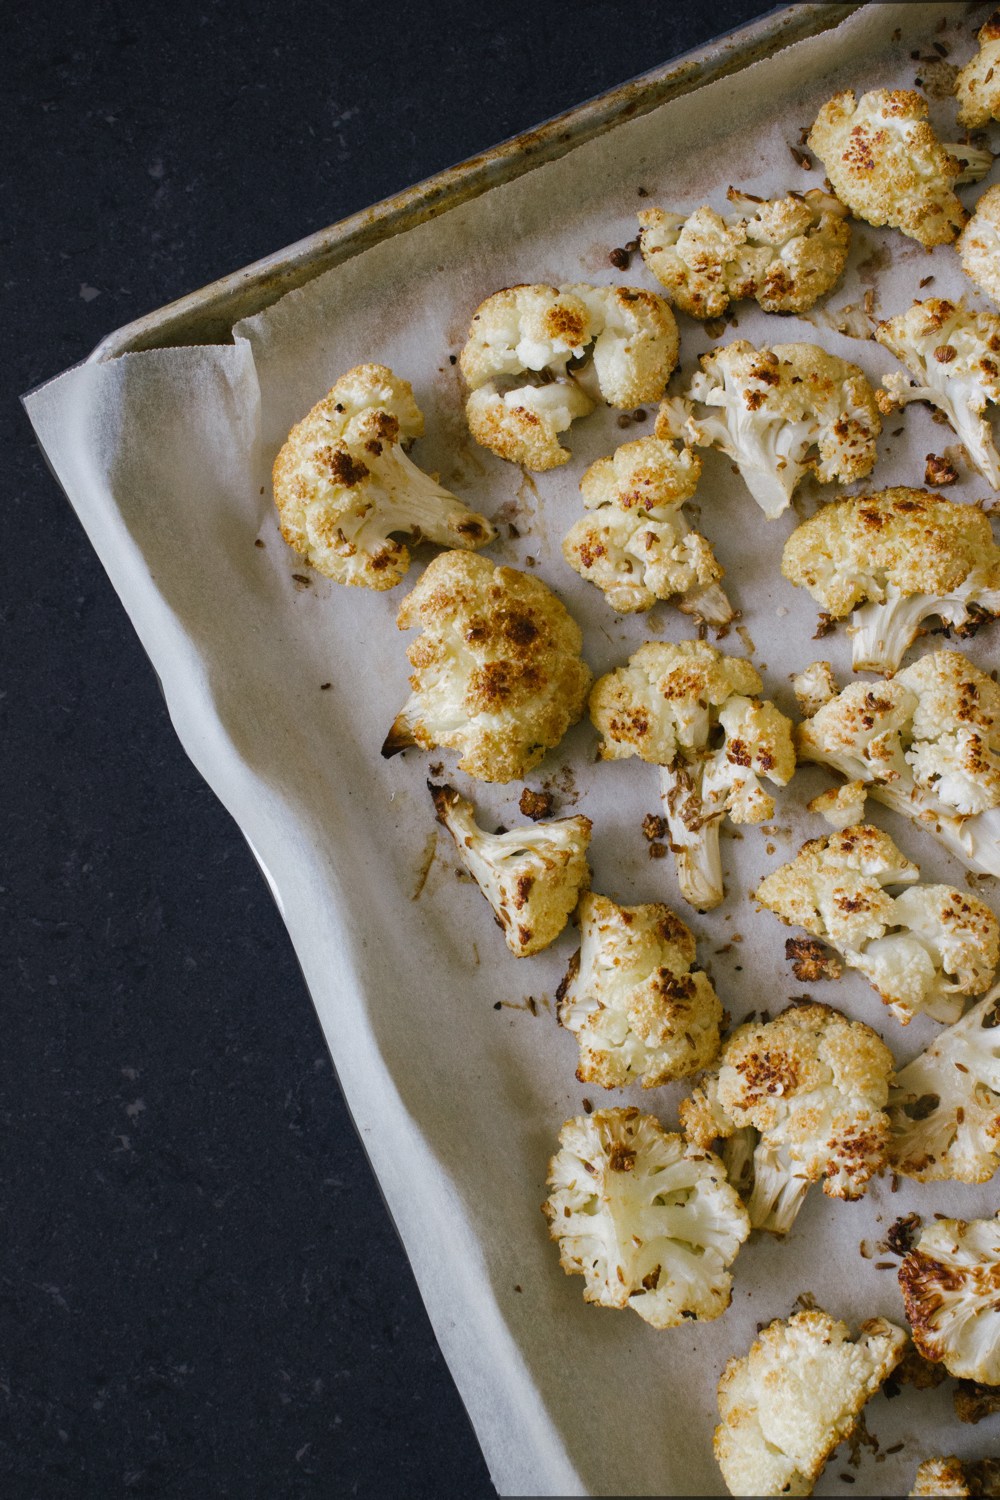 Roasted Cauliflower With Almonds, Cranberries and Yoghurt